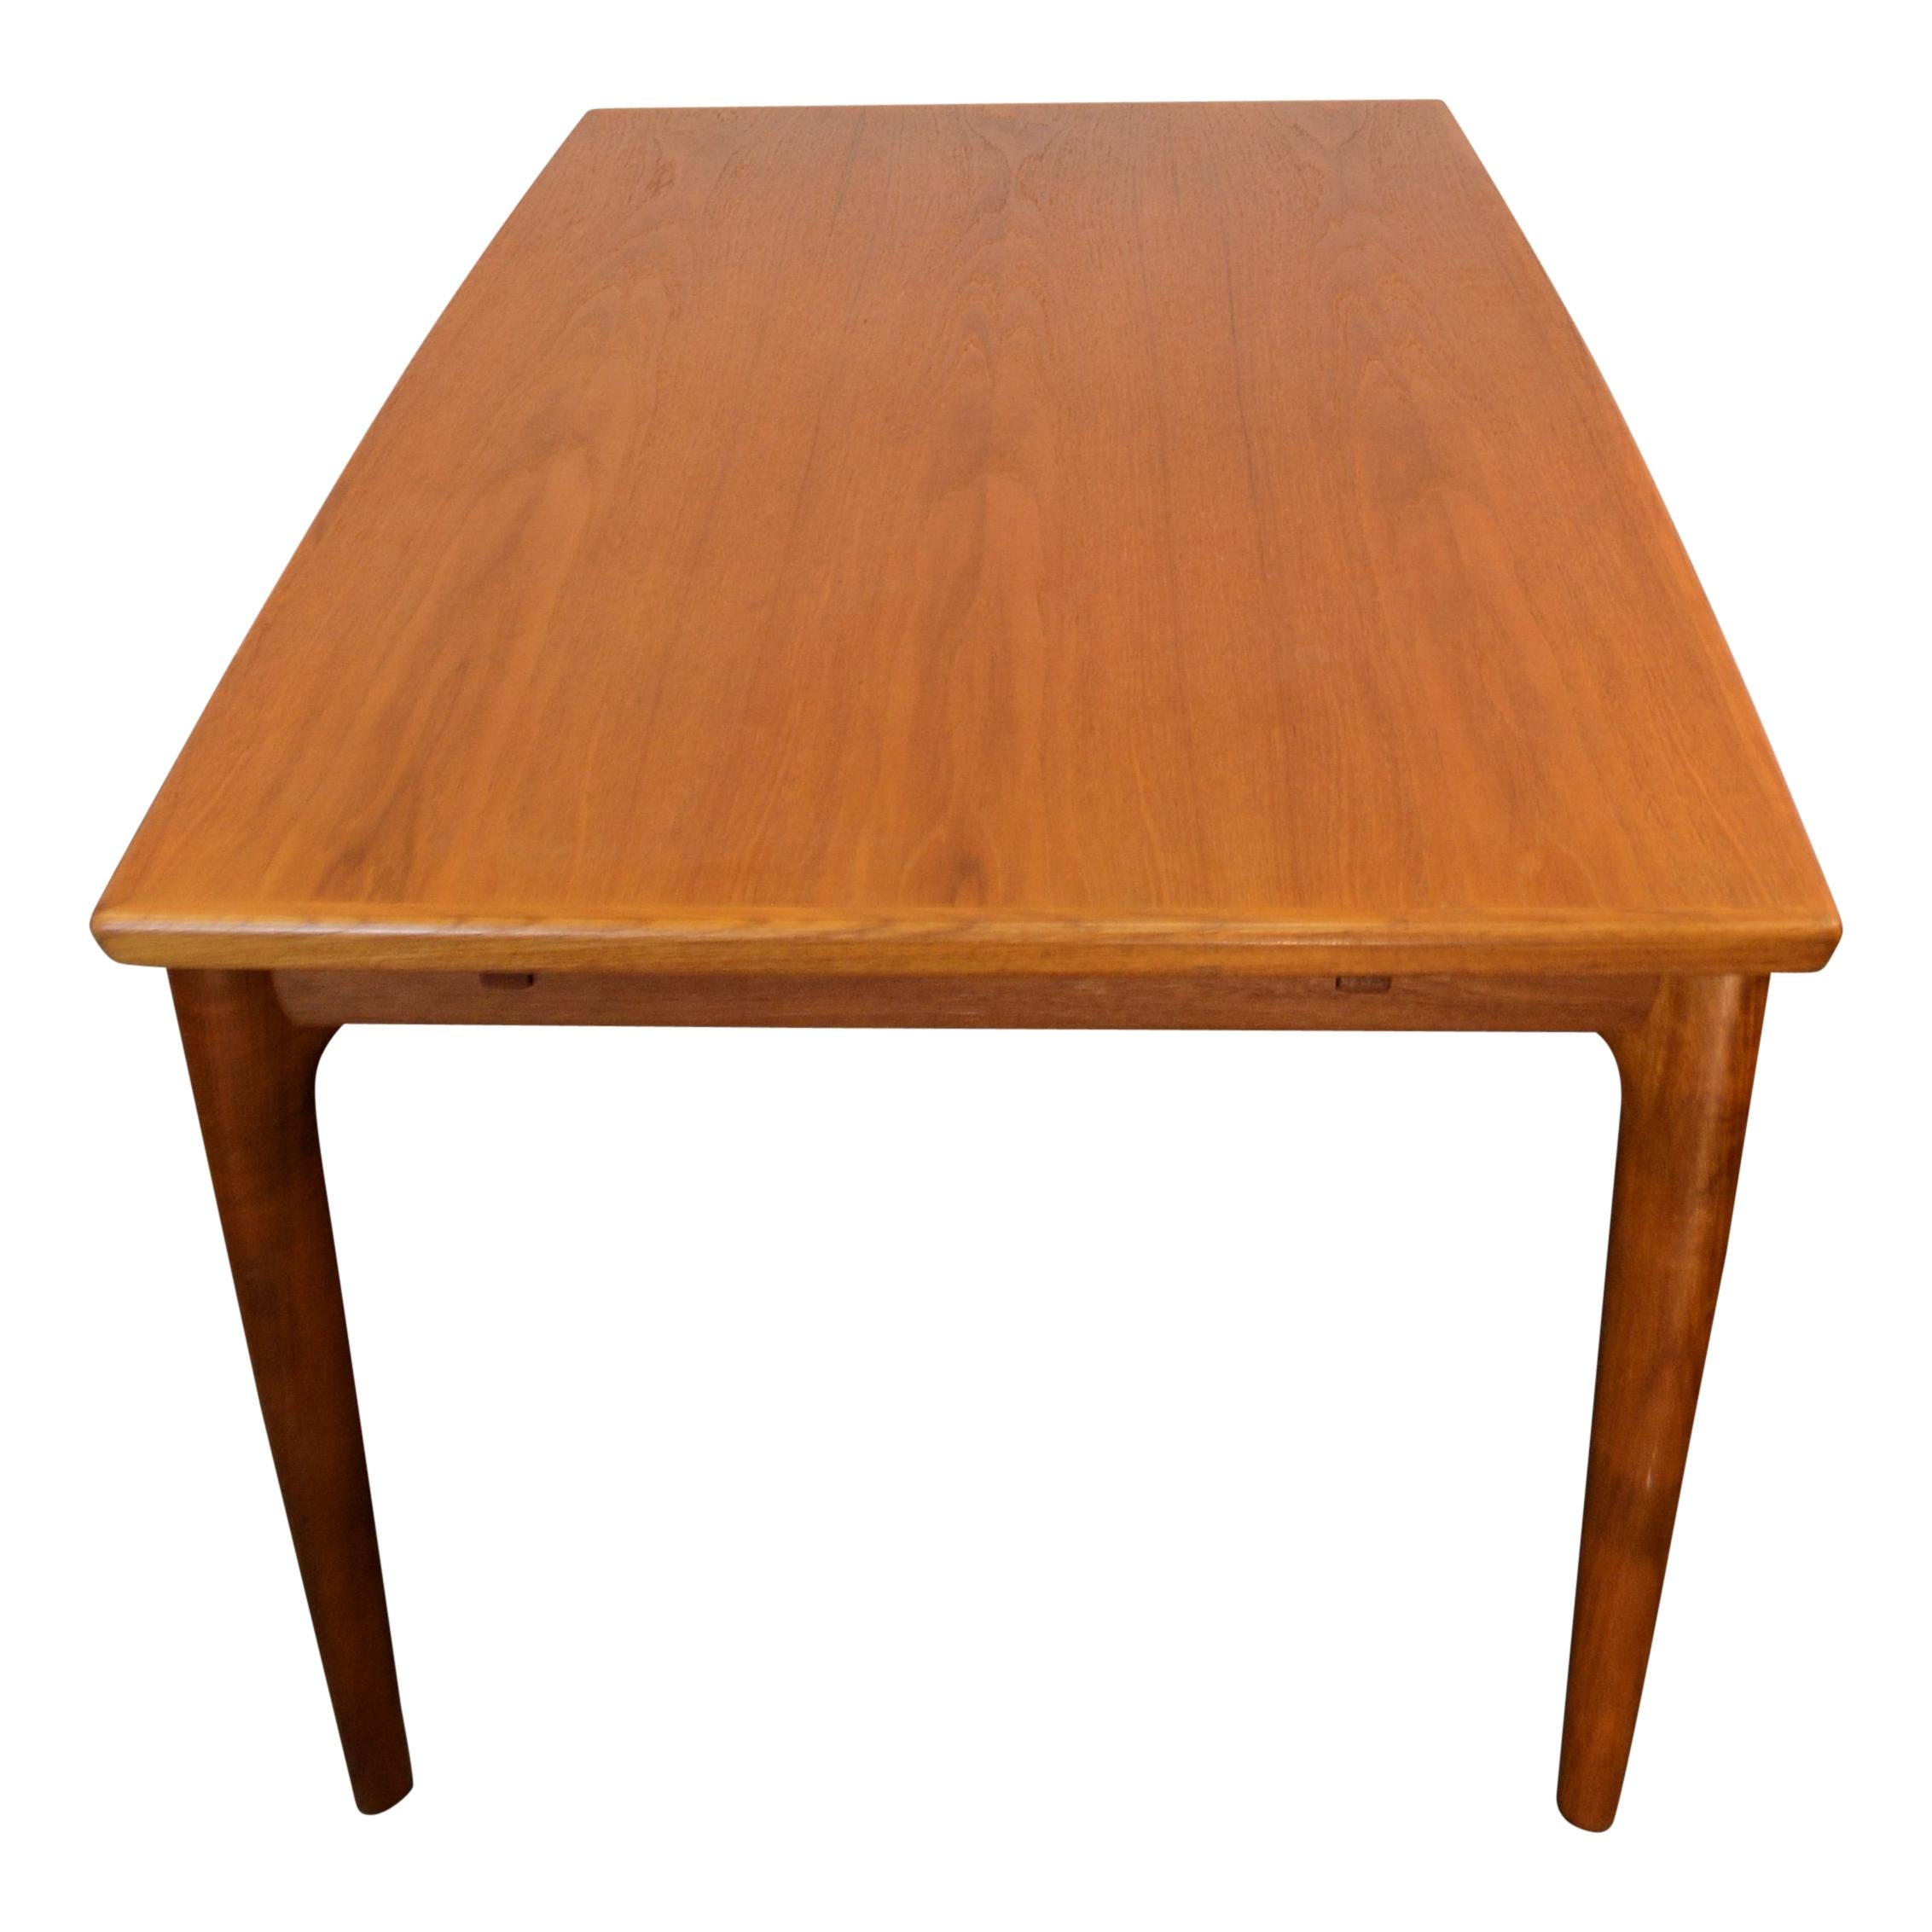 Grete Jalk Extendable Teak Dining Table In Good Condition For Sale In Panningen, NL